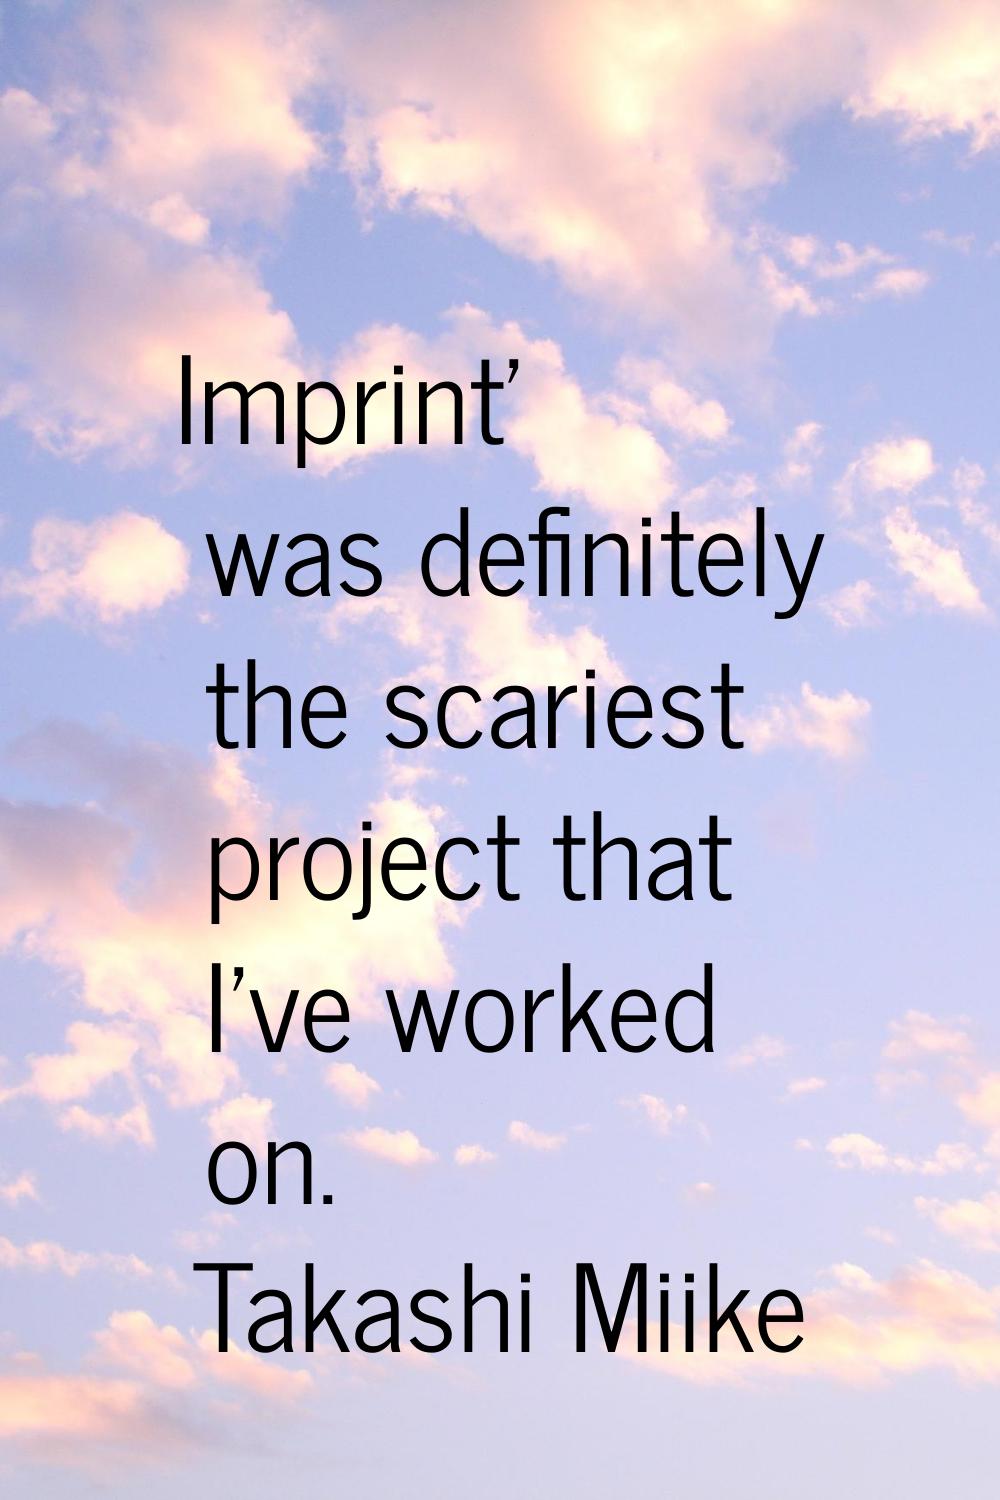 Imprint' was definitely the scariest project that I've worked on.